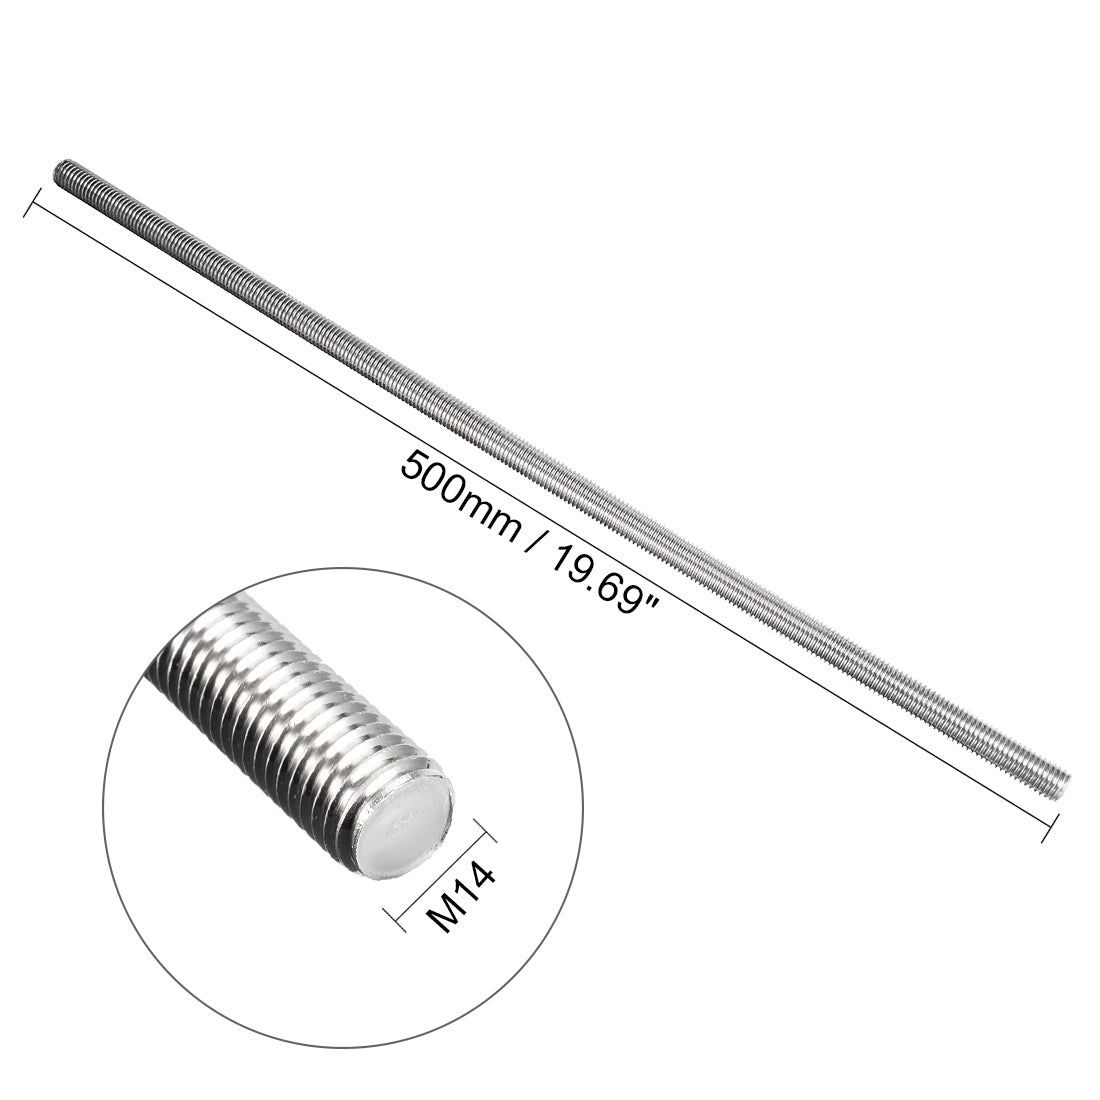 uxcell Uxcell M14 x 500mm Fully Threaded Rod 304 Stainless Steel Right Hand Threads